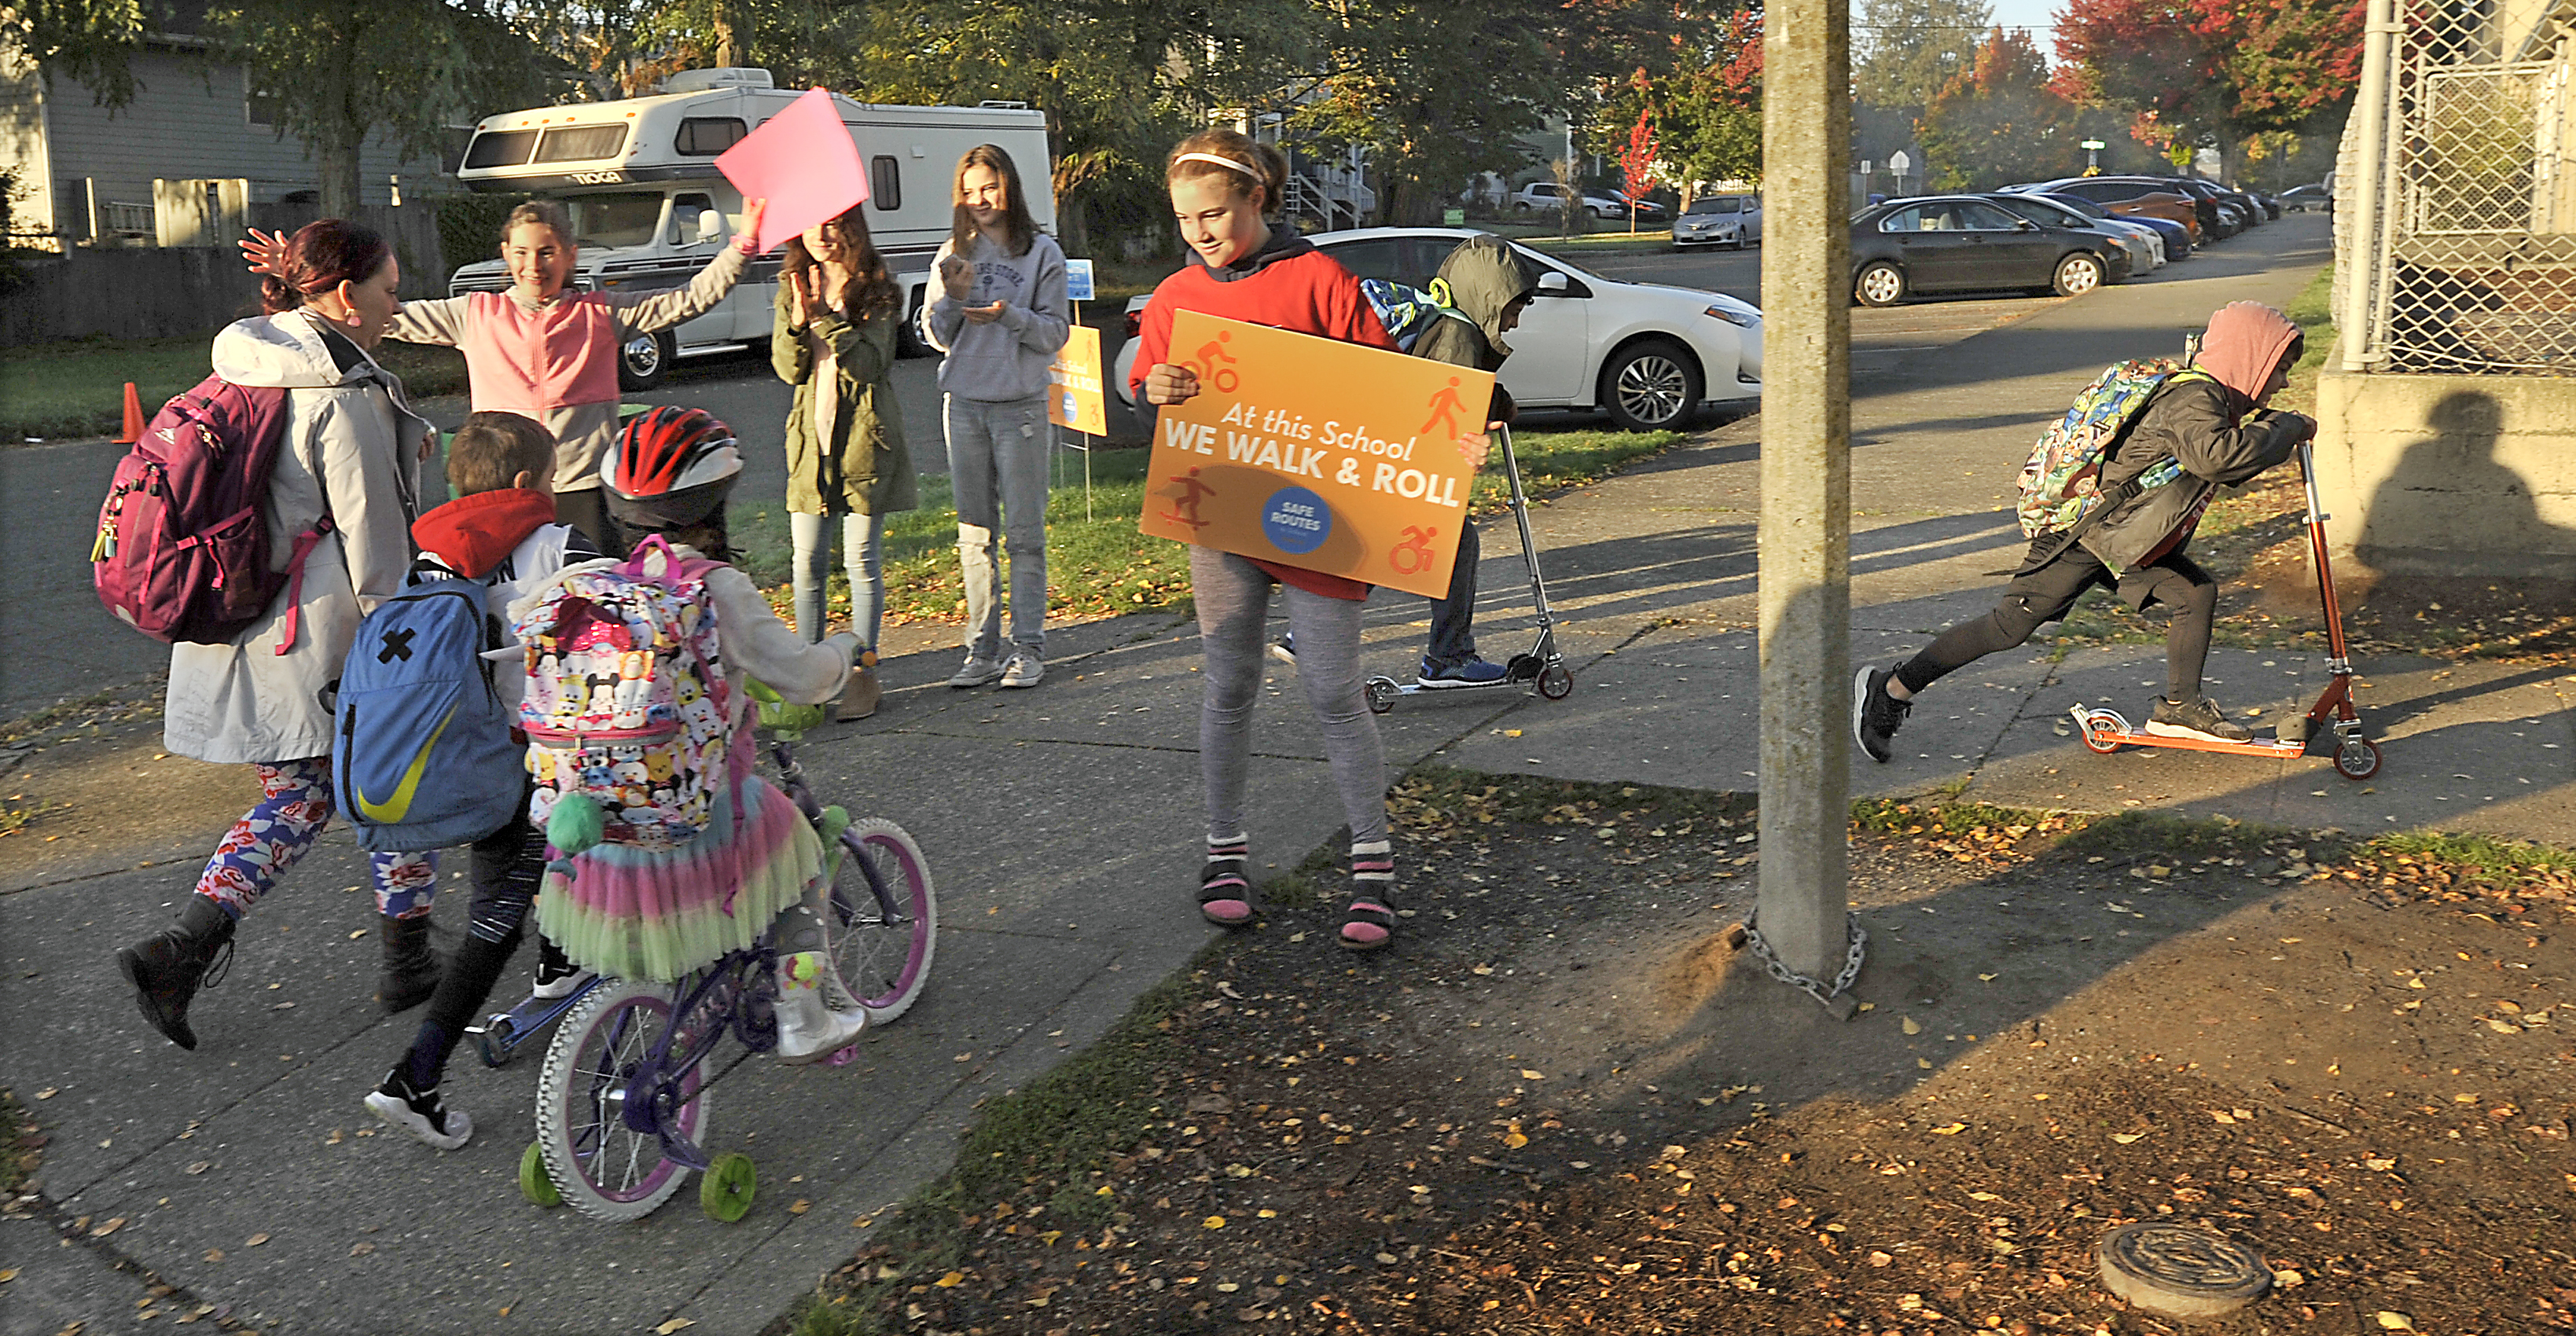 students walking and scooting to school with an adult celebrating them, holding a sign saying At this School we Walk and Roll